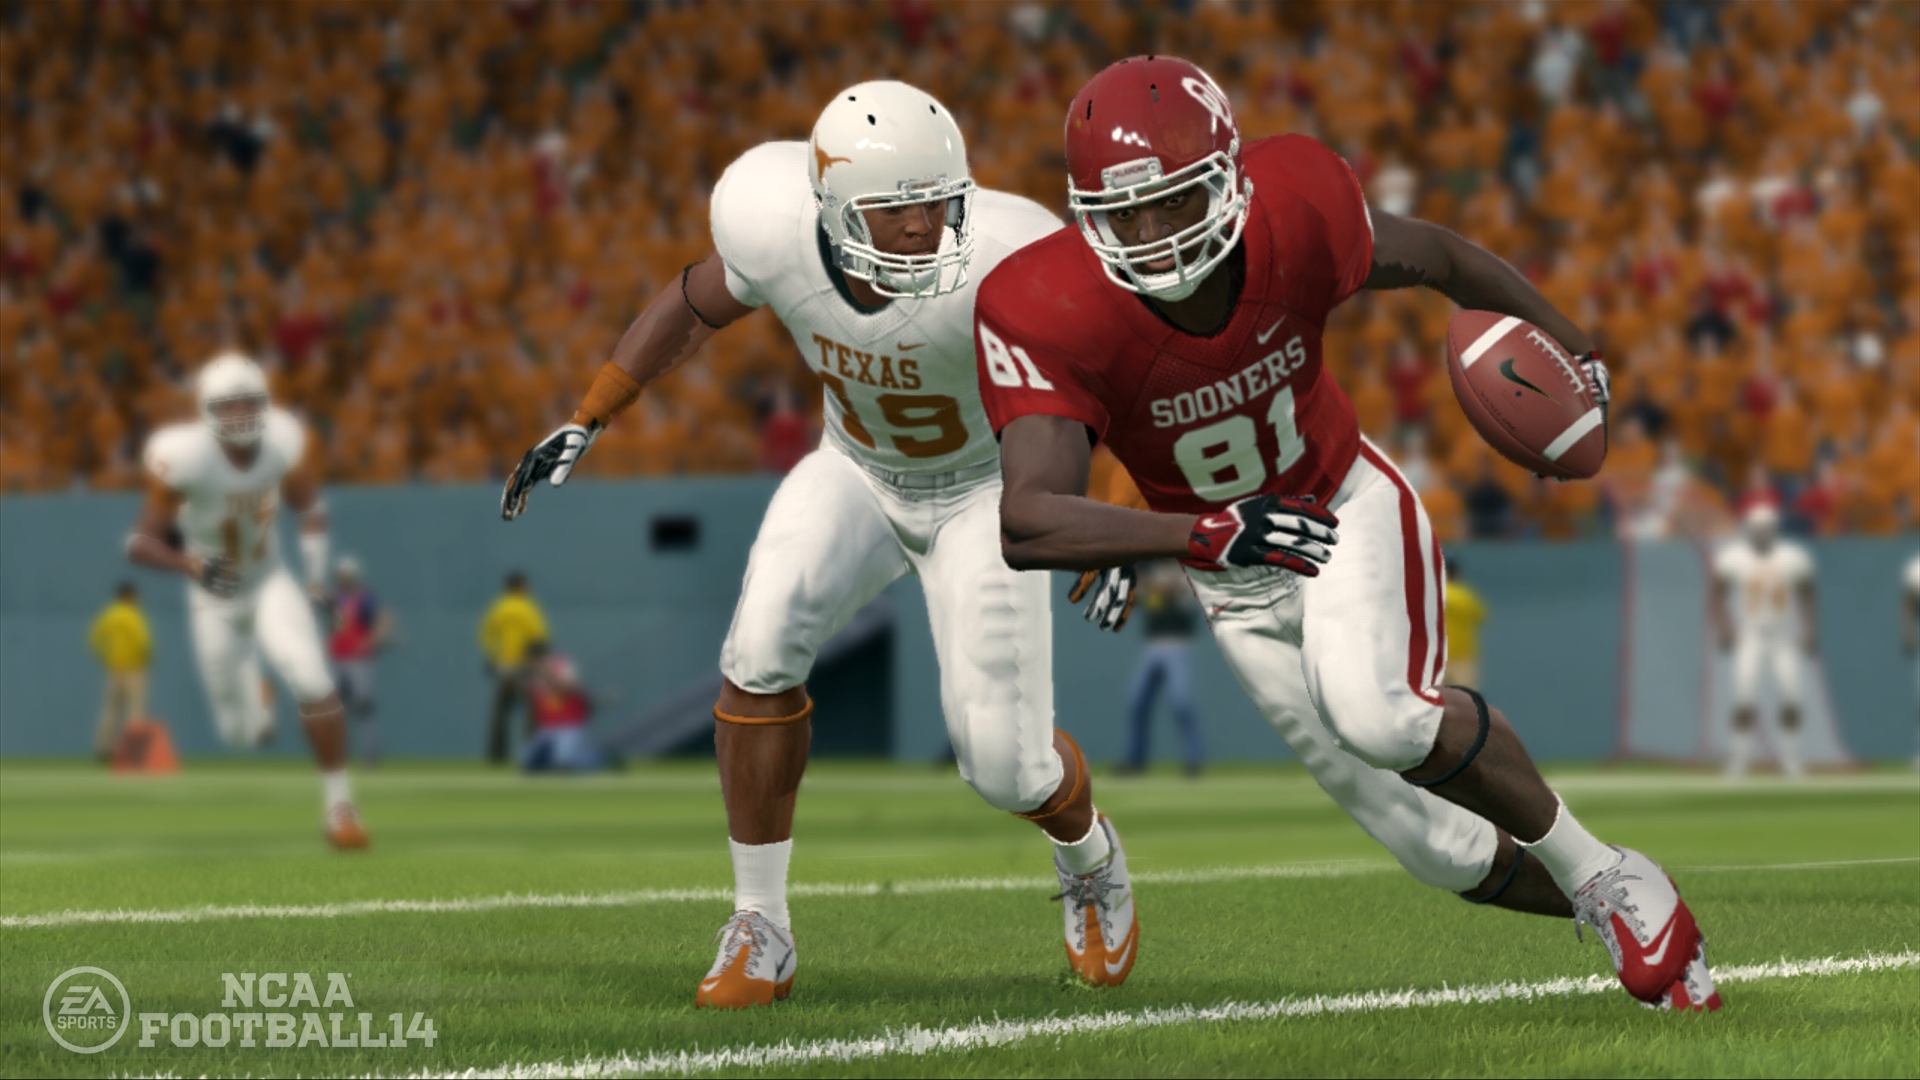 NFL Pros Go Back To College To Fight For Their Video Game Rights